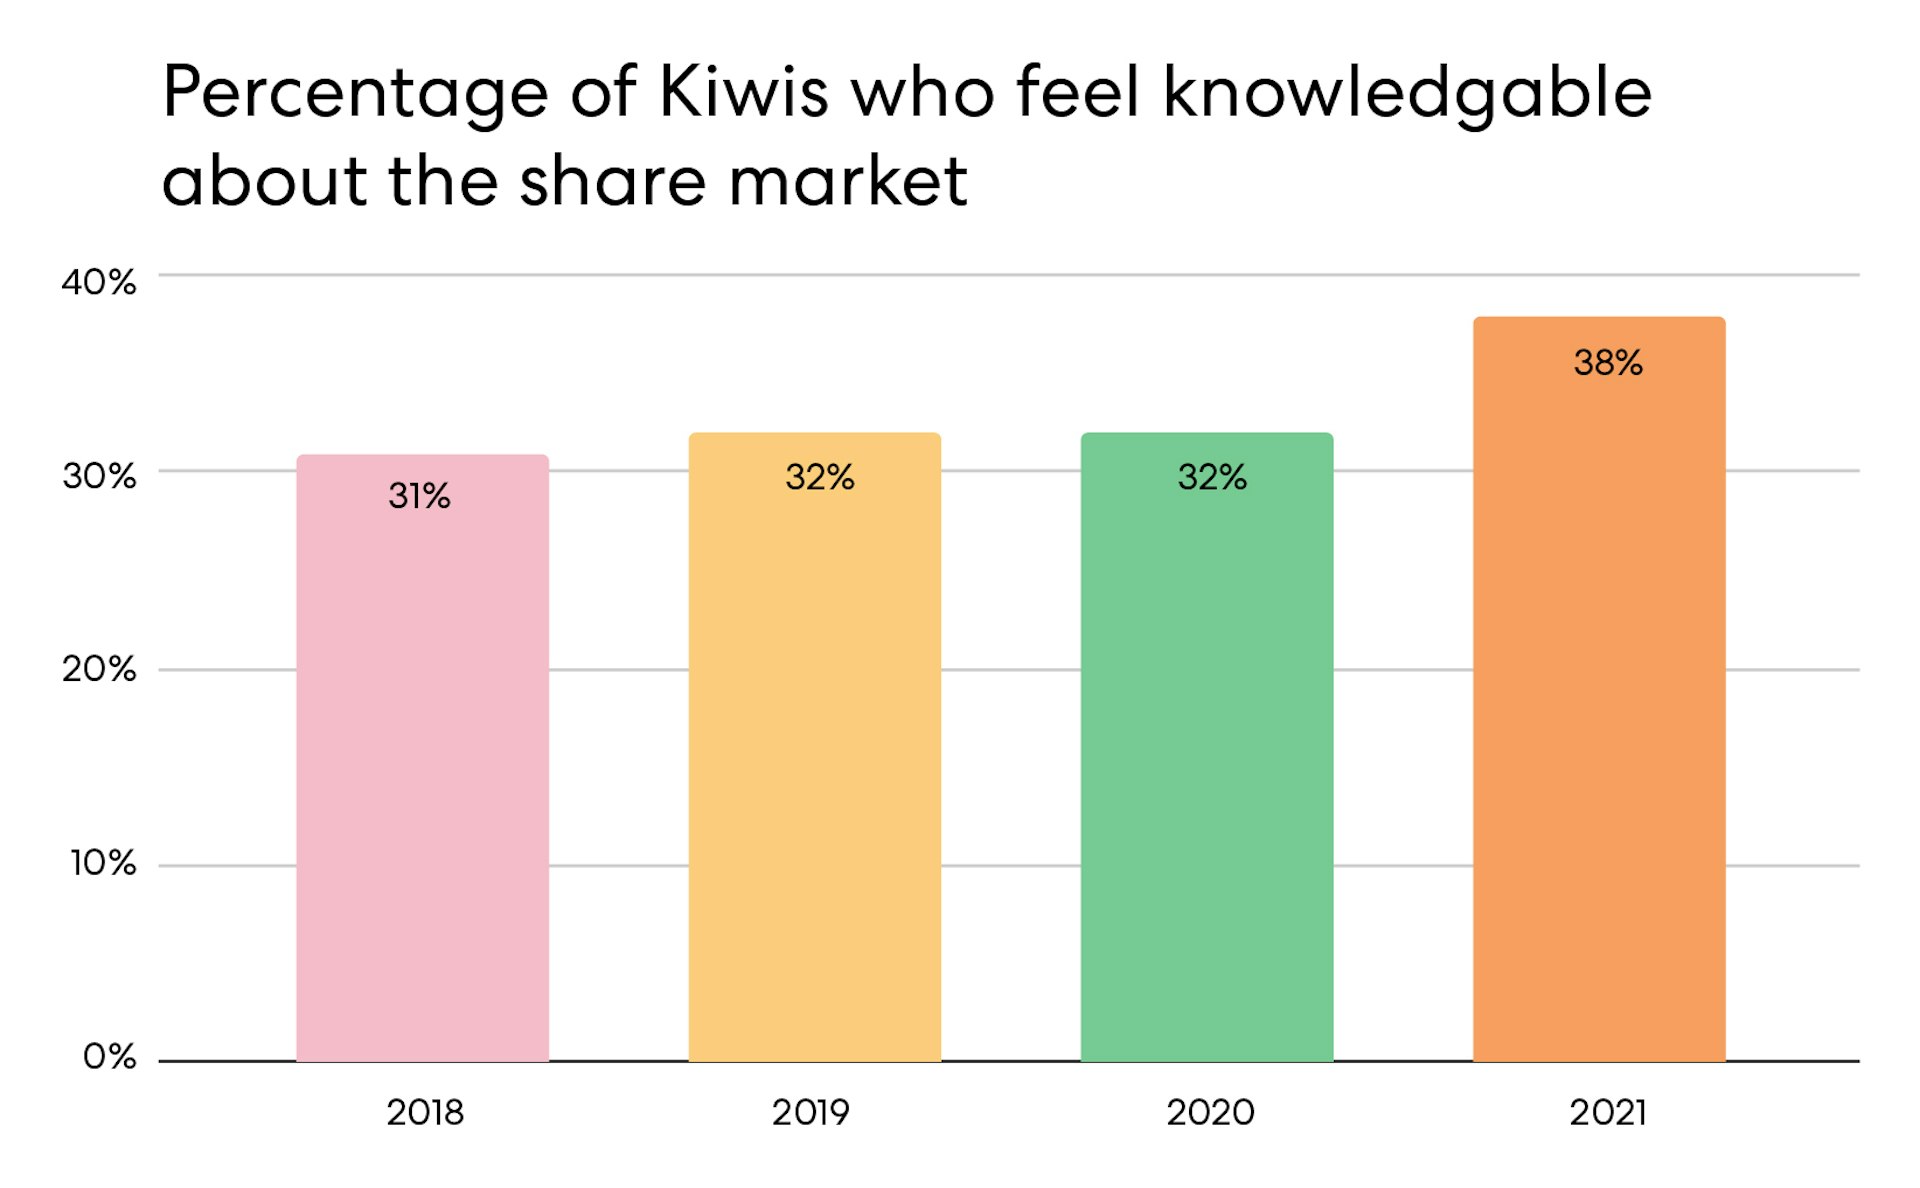 Bar graph showing percentage of Kiwis who feel knowledgeable about the share market rising from 31% in 2018 to 38% in 2021.